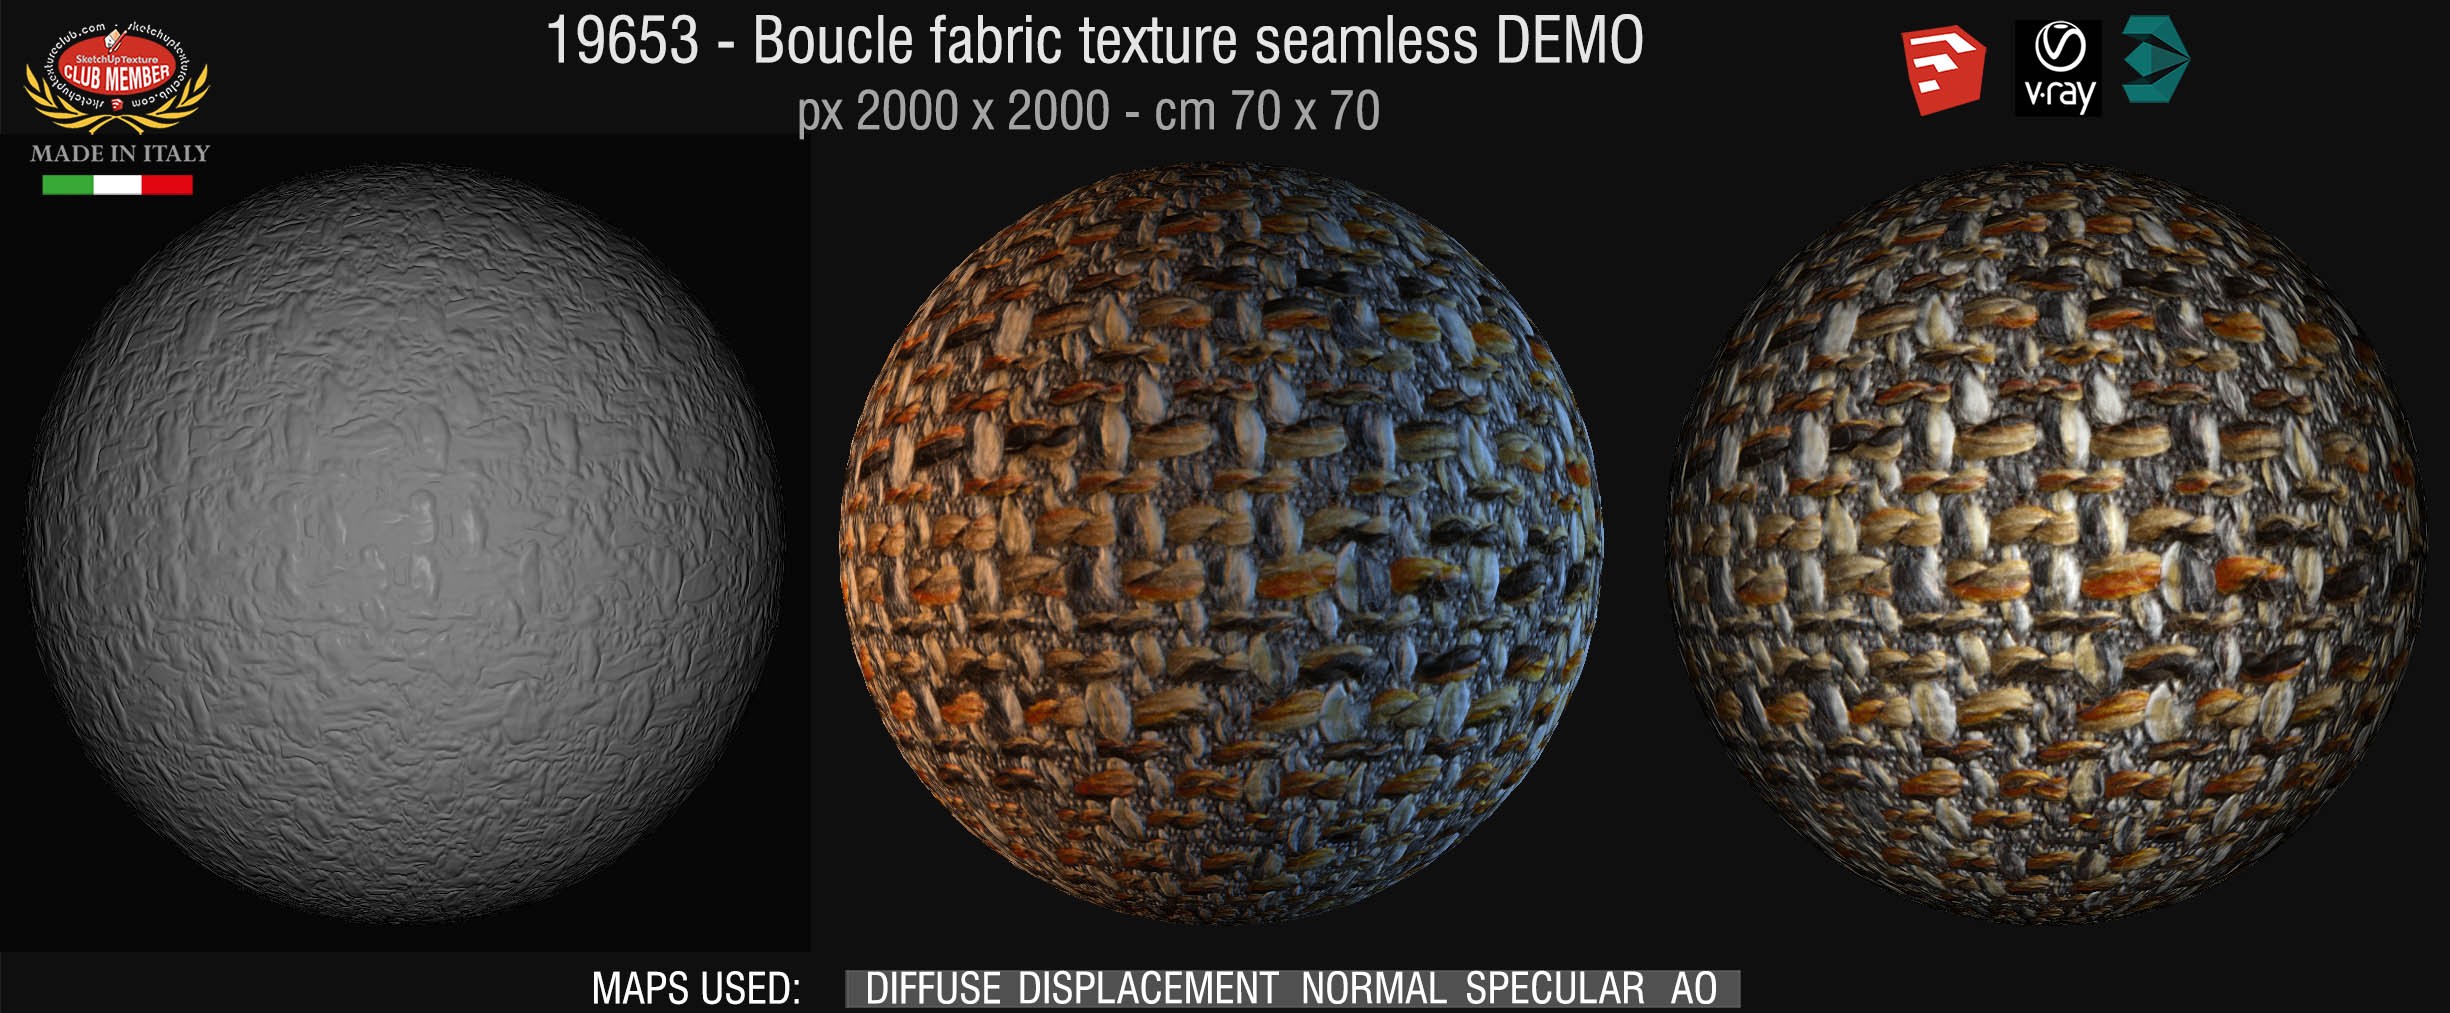 19653 Boucle fabric texture seamless + maps DEMO